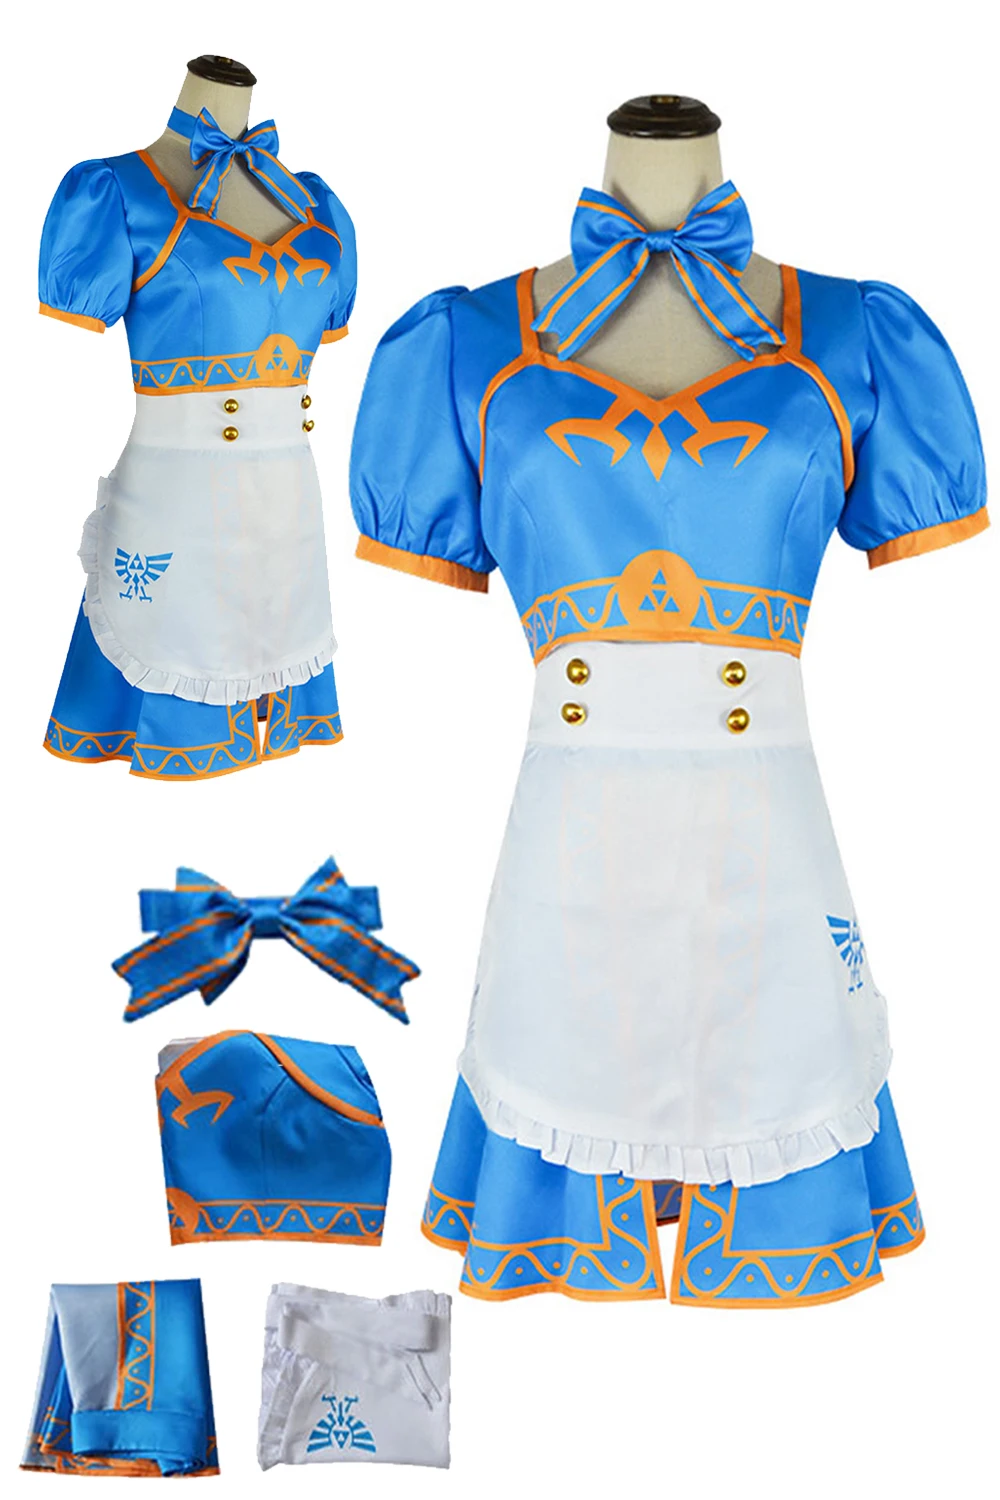 

Zerdar Princess Cosplay Blue Maid Dess Costume Fancy Dress Up Skirts Outfits RolePlay Female Women Adult Halloween Carnival Suit